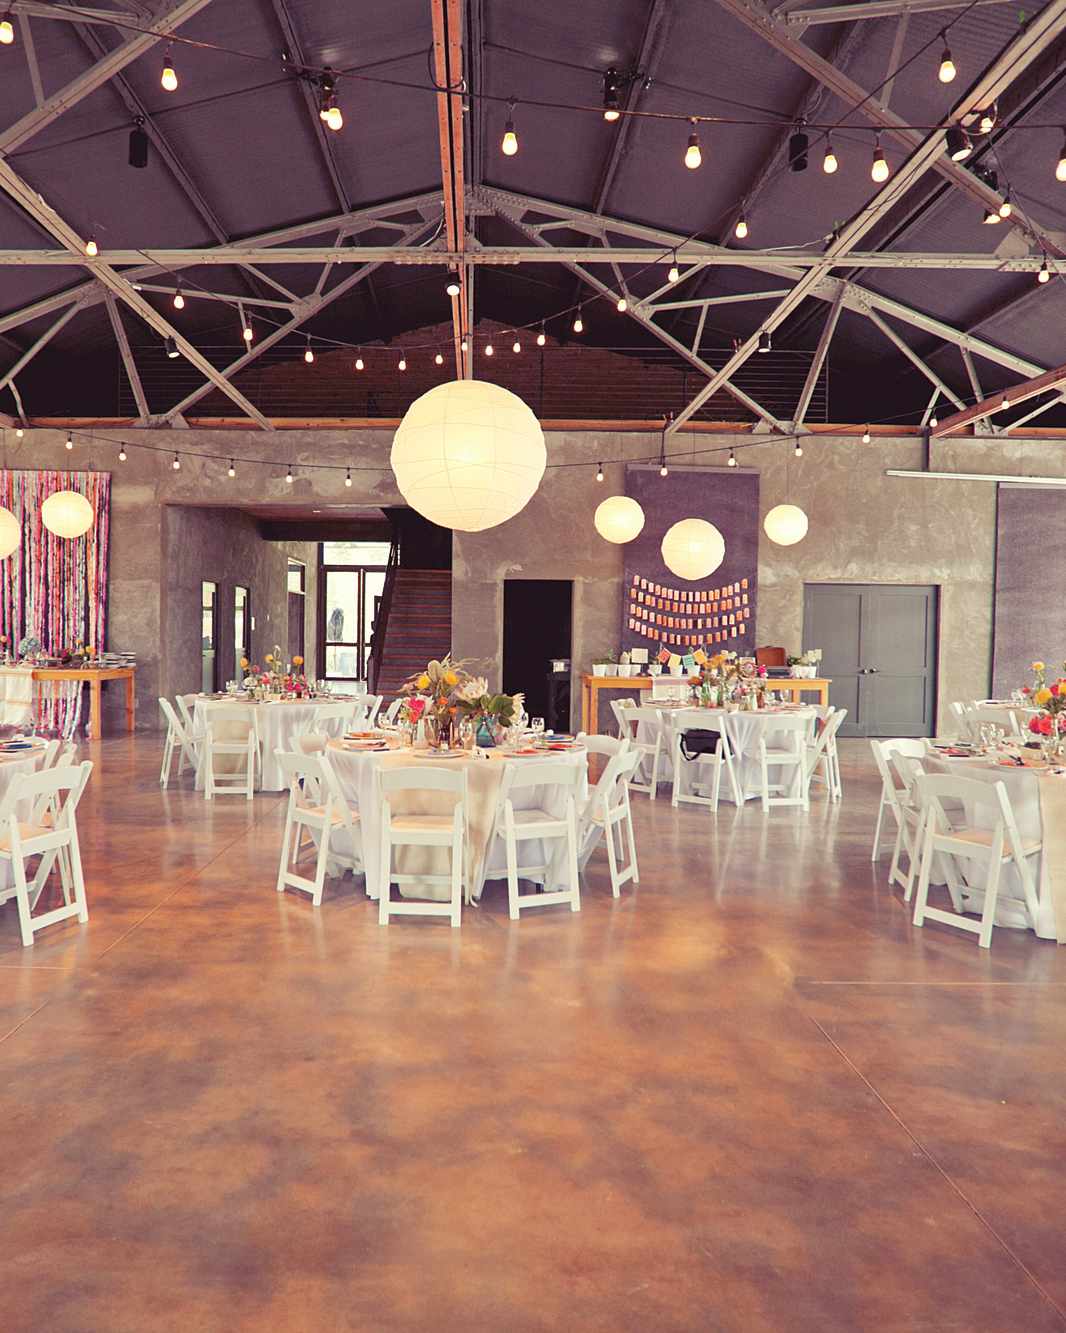 The Reception Space